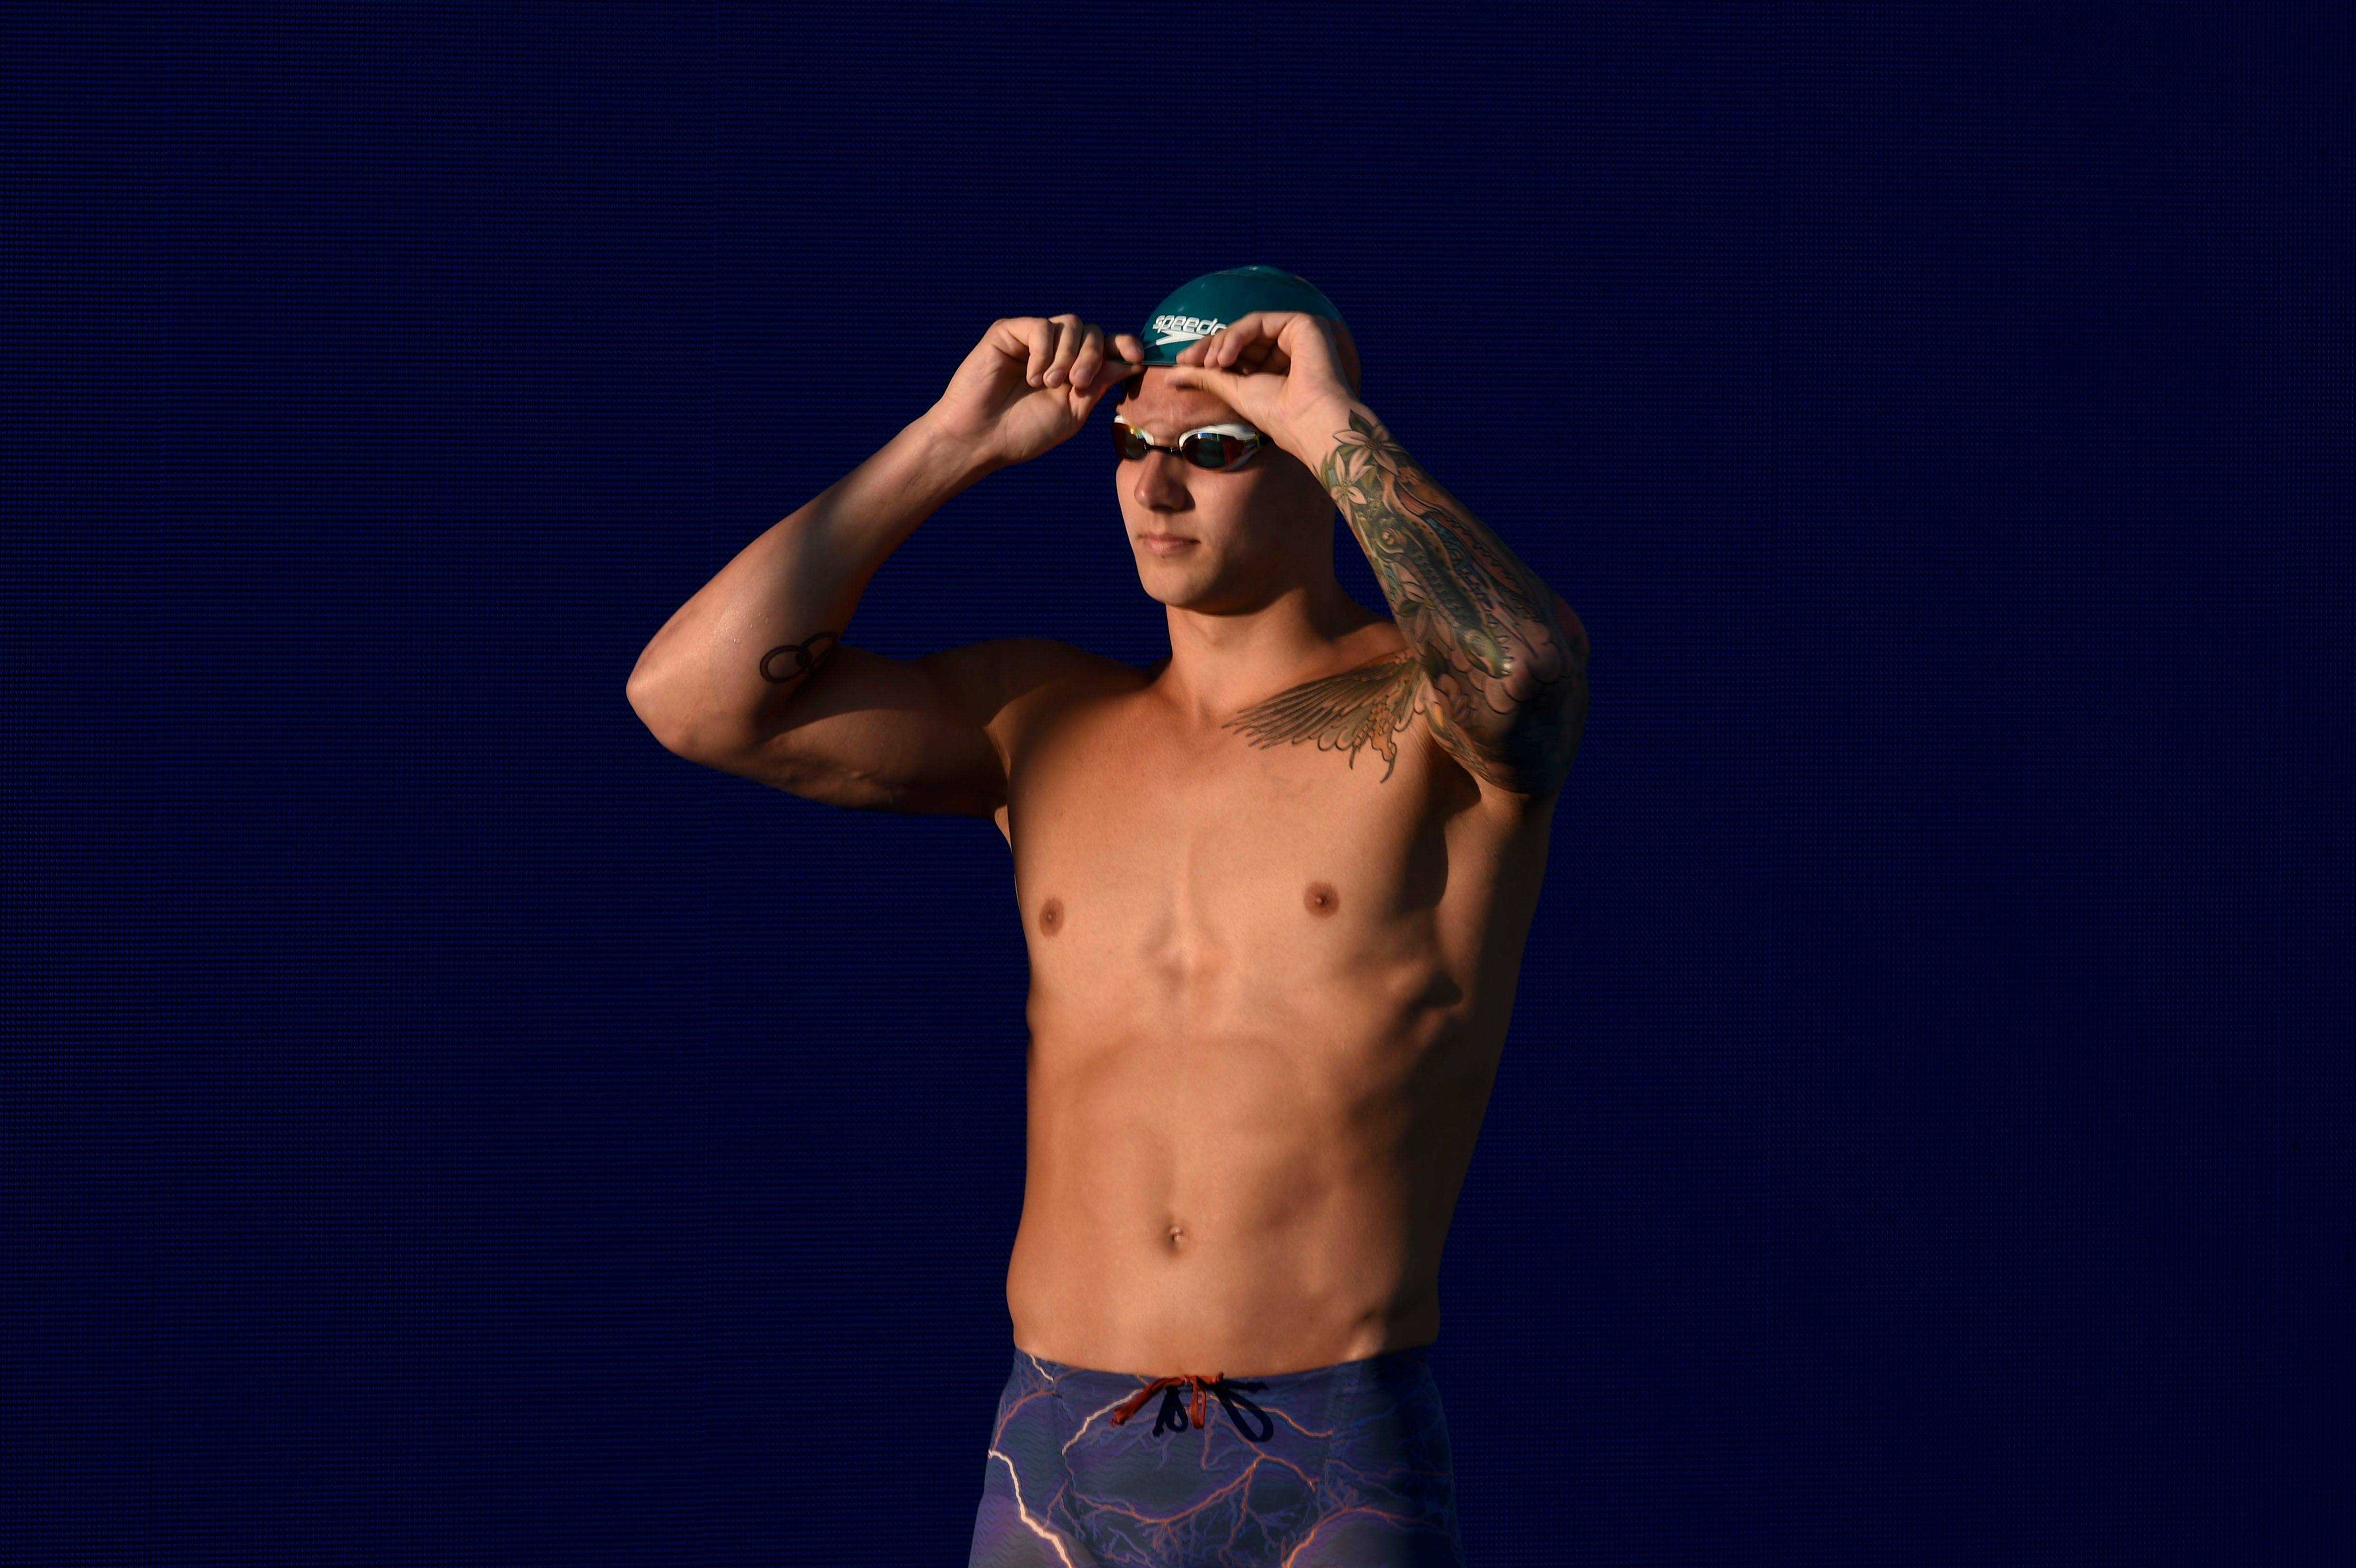 Caeleb Dressel prepares for the Men's 100 LC Meter Butterfly finals during the 2018 USA Swimming Phillips 66 National Championships swim meet at William Woollett, Jr. Aquatic Center on July 27, 2018.